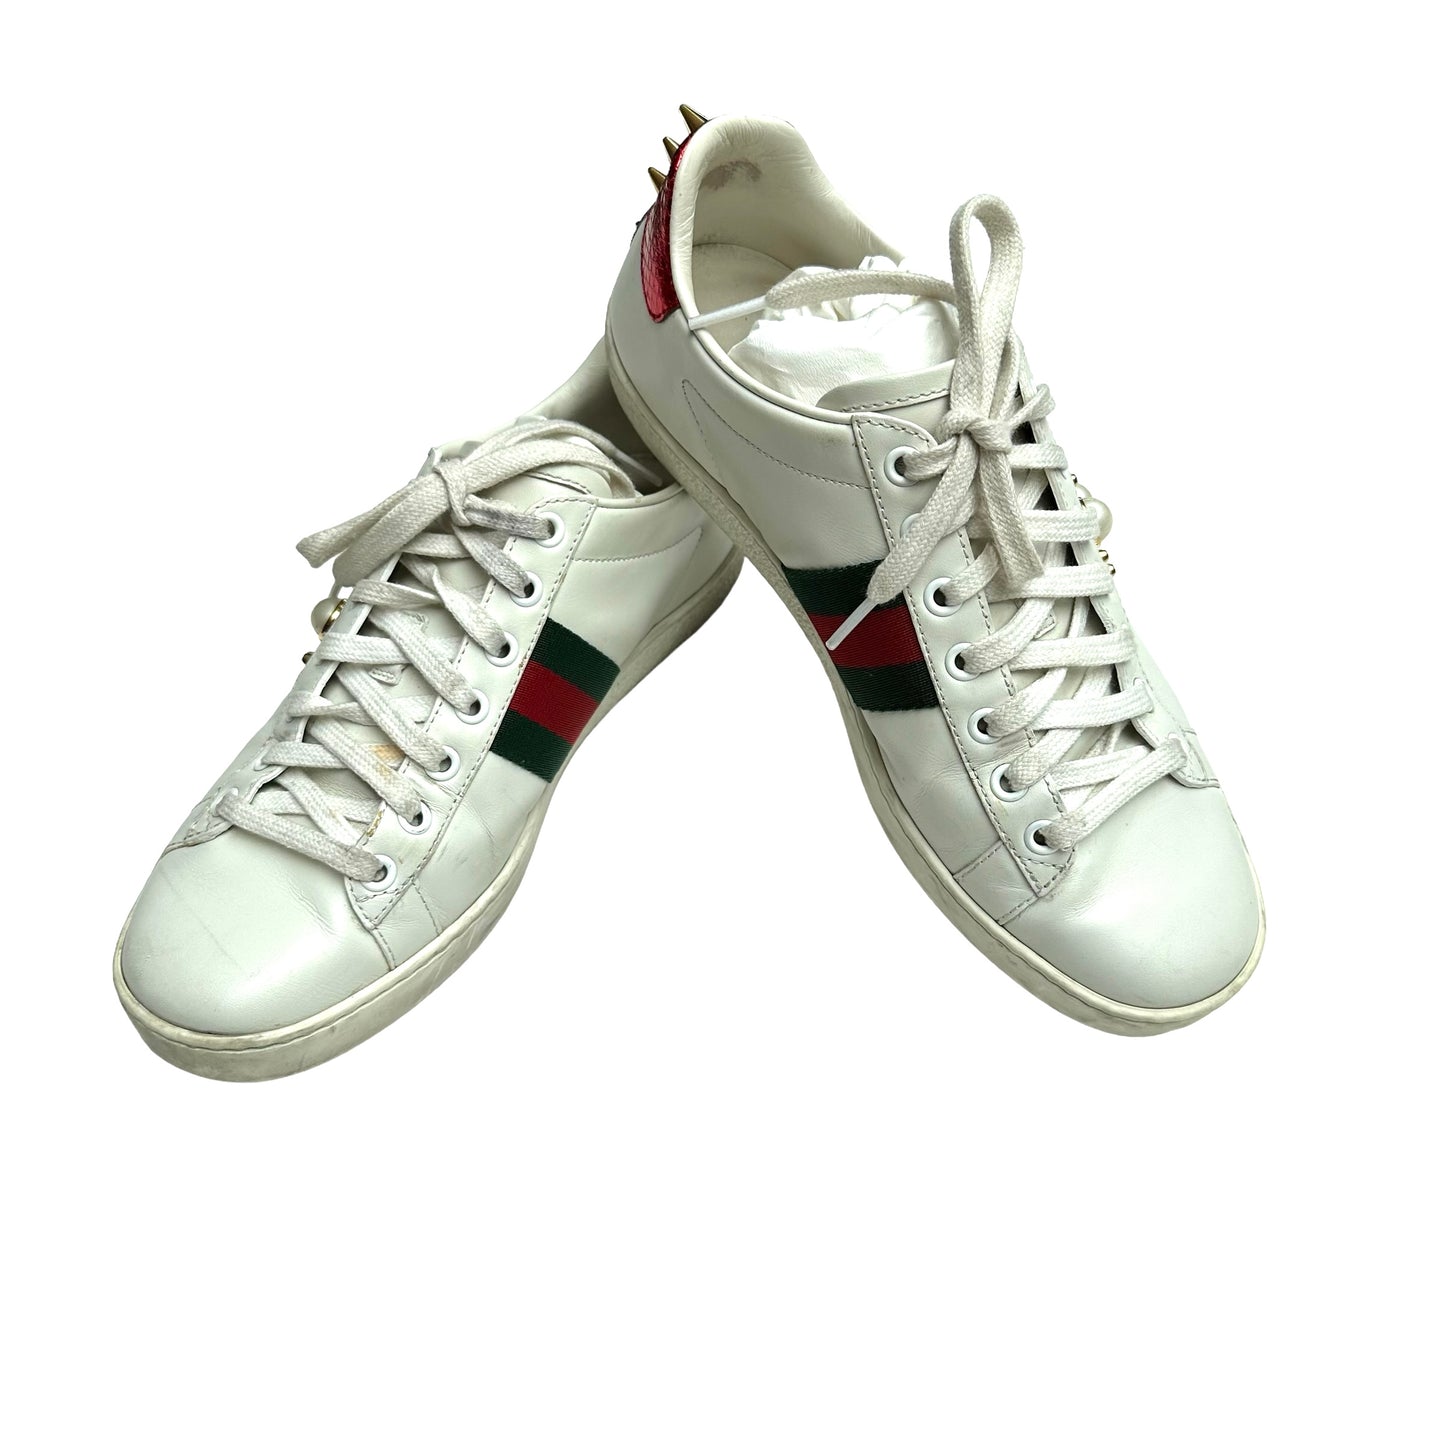 Sneakers w/Spikes & Faux-Pearl Accents - 8